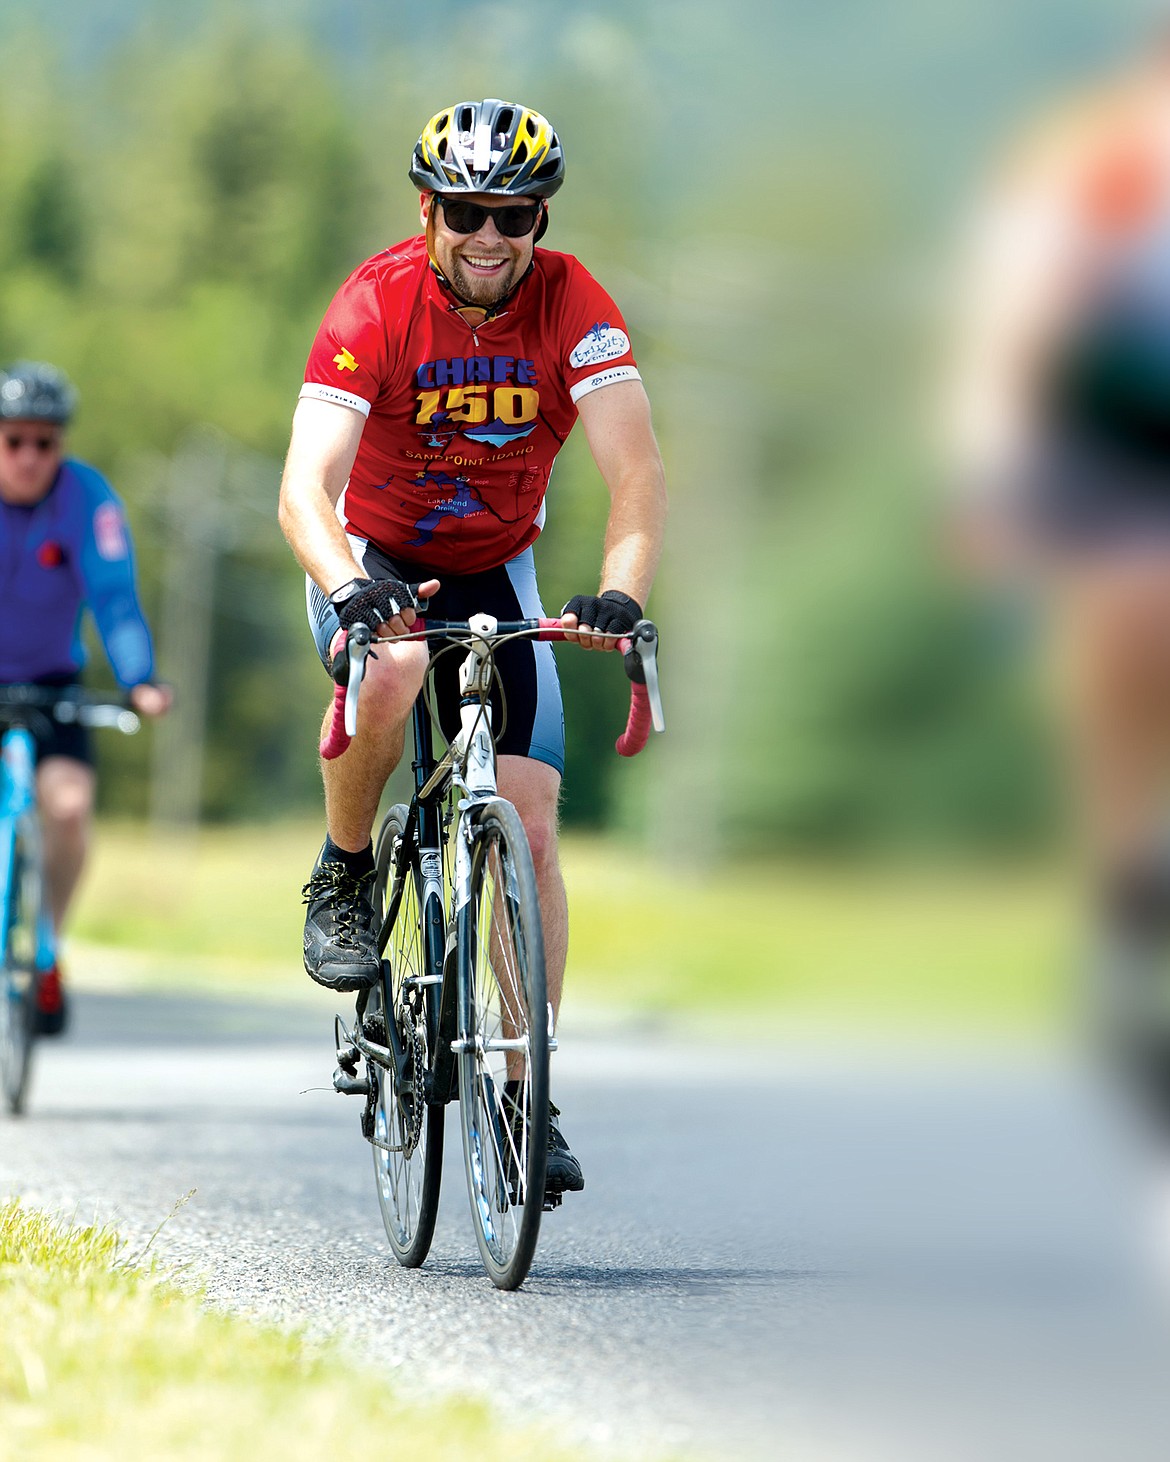 (Photo courtesy JASON DUCHOW PHOTOGRAPHY)A rider takes part in a past CHAFE 150 Gran Fondo bicycling event. As rider interest and national press attention both build momentum, the organizers have branched out from the historical 30-, 80- and 150-mile CHAFE rides to include new routes for 2019.